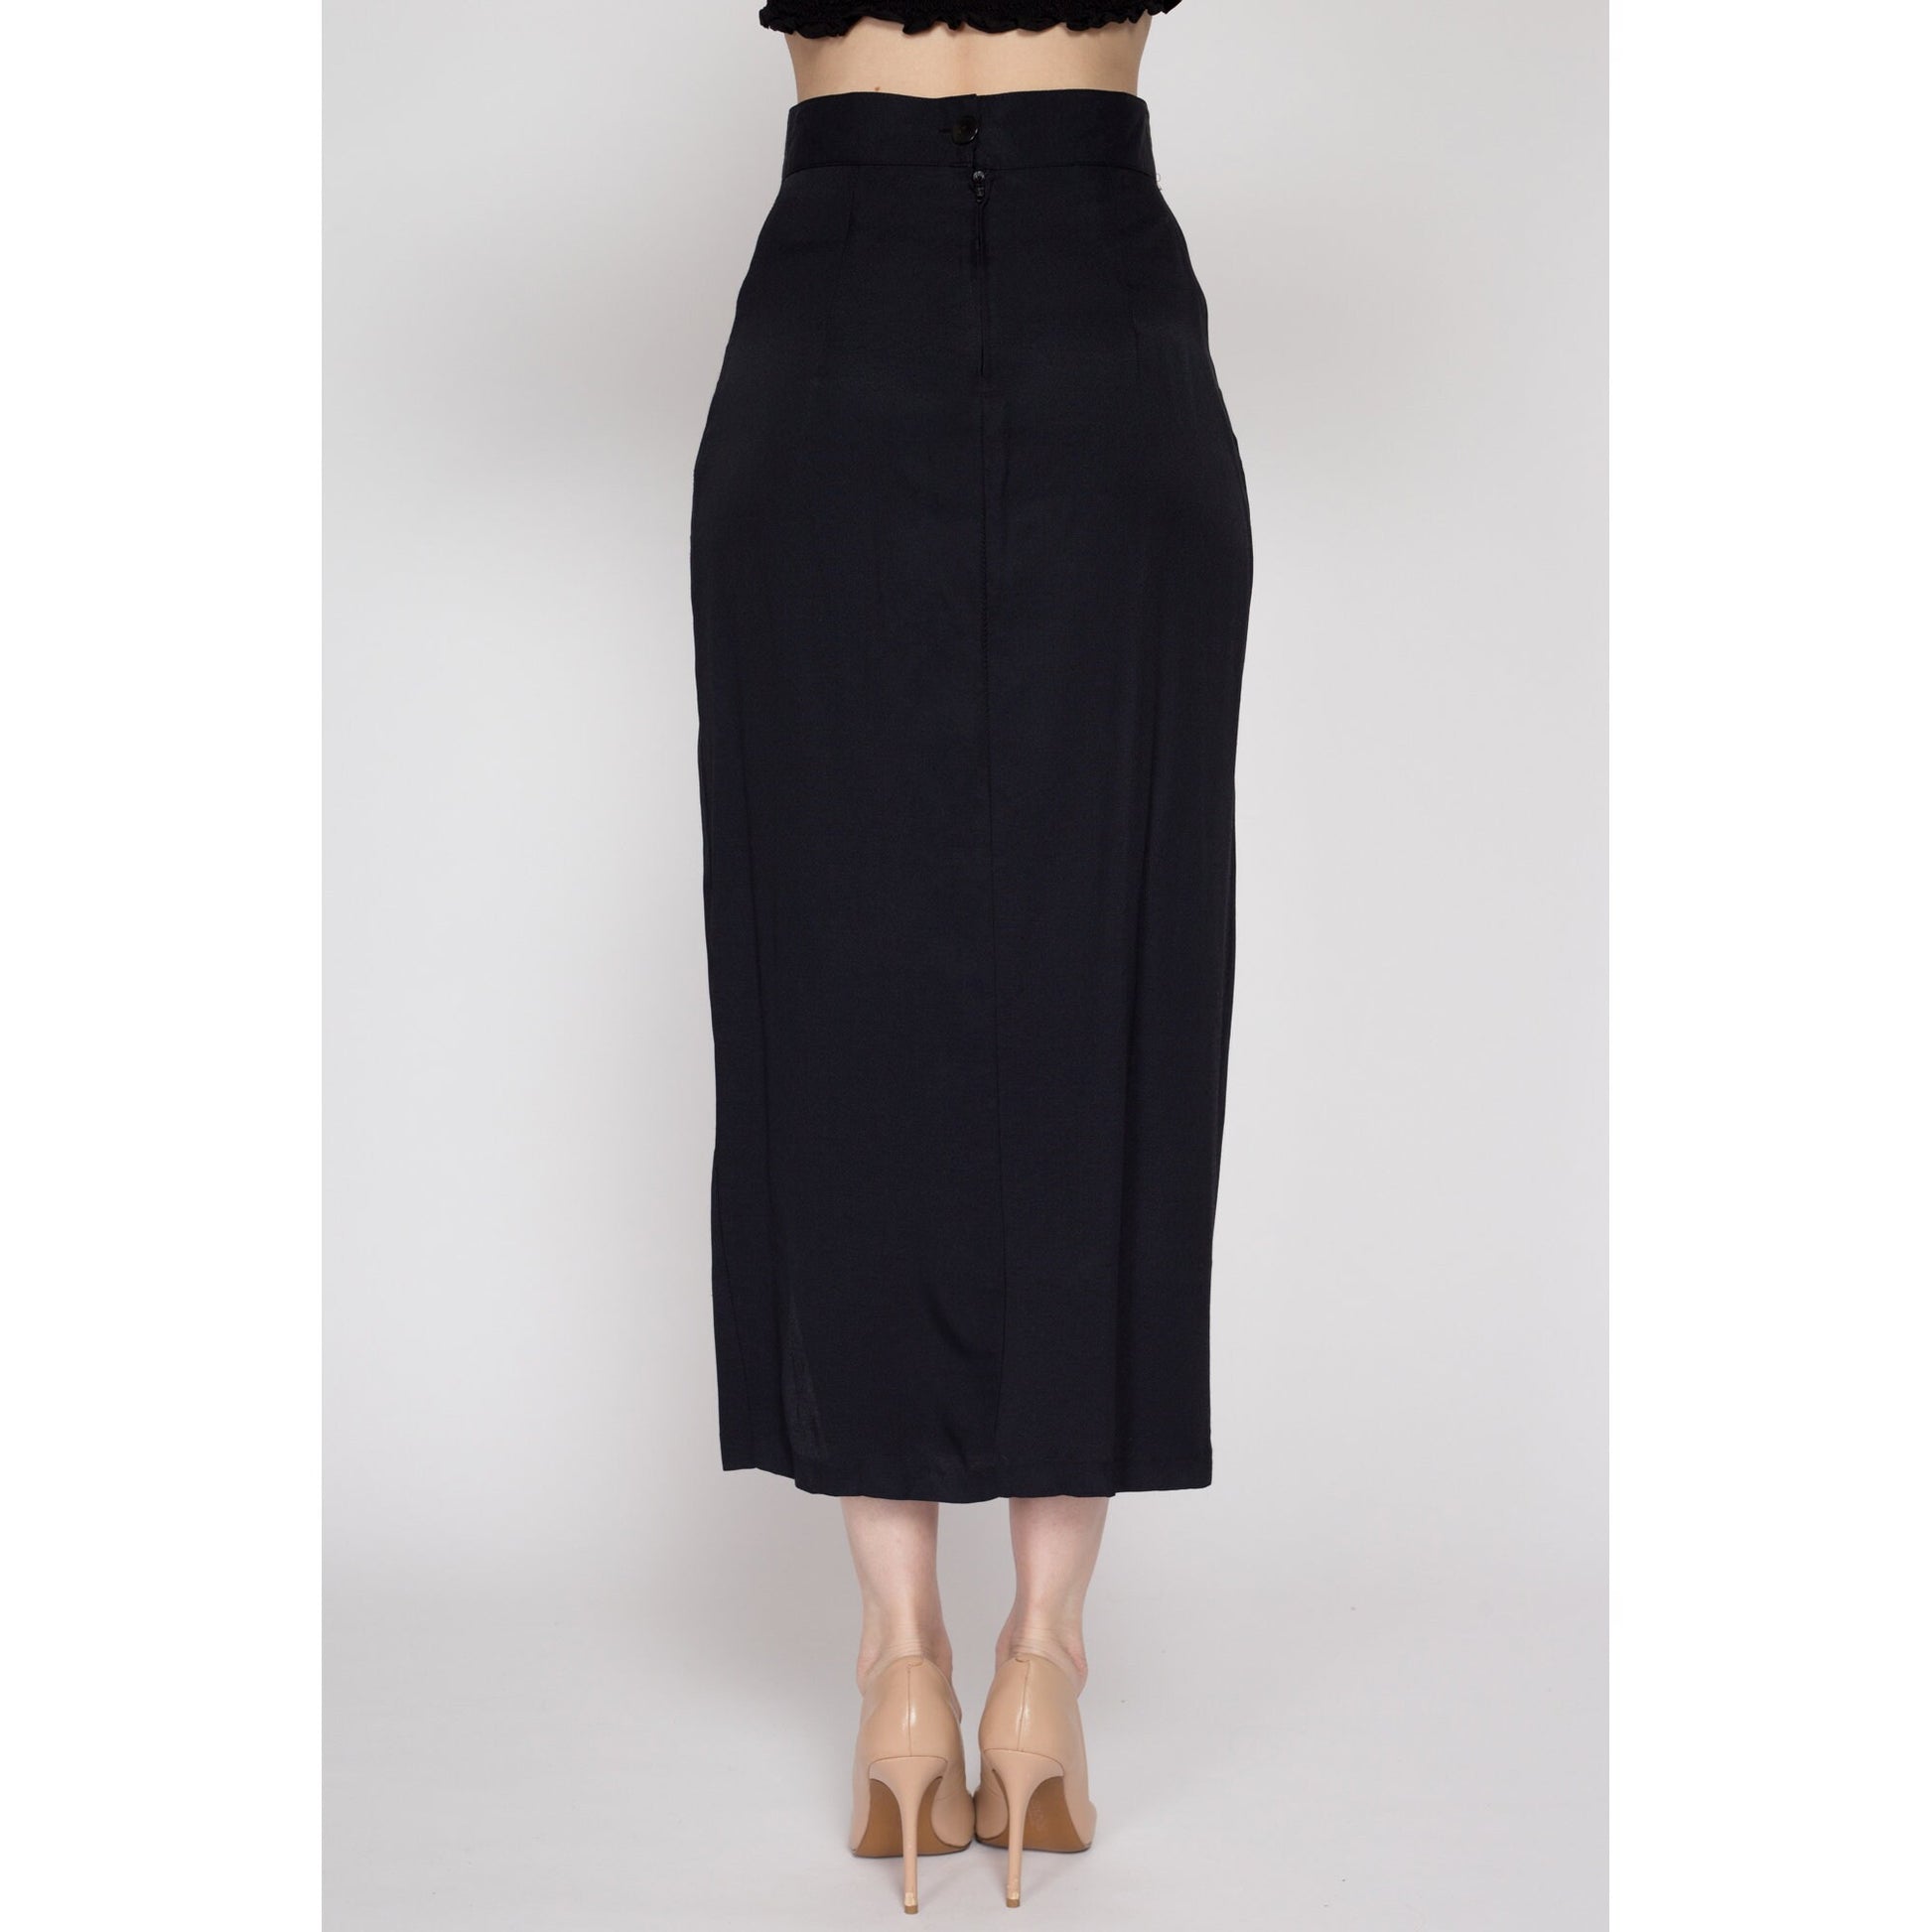 Small 90s Black High Slit Frog Knot Pencil Skirt 26" | Vintage High Waisted Fitted Wiggle Maxi Skirt